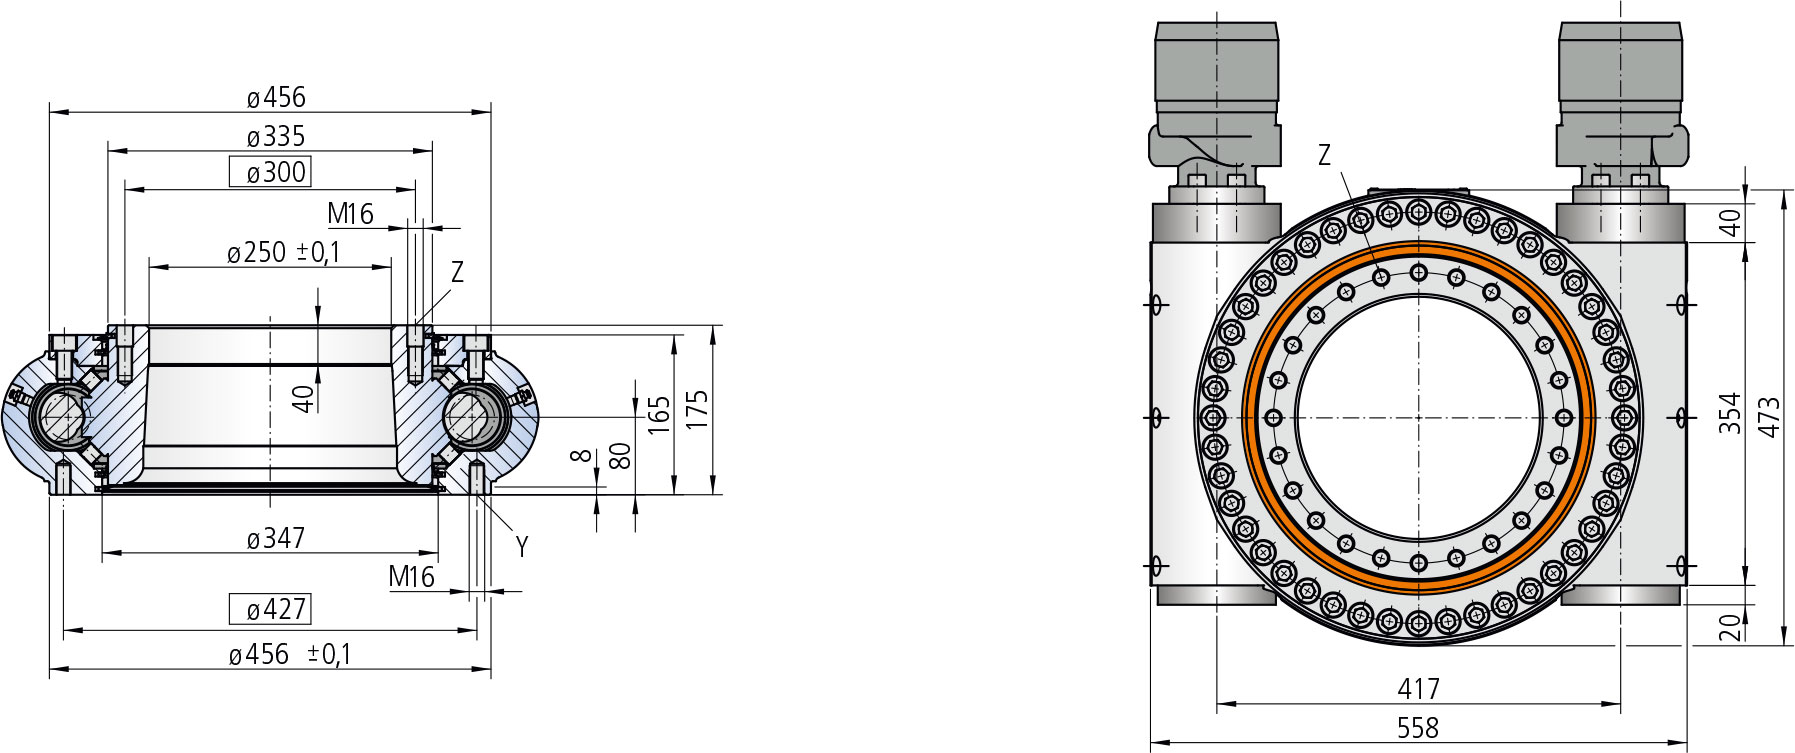 WD-H 0300 / 2 drive WD-H Series cad drawing